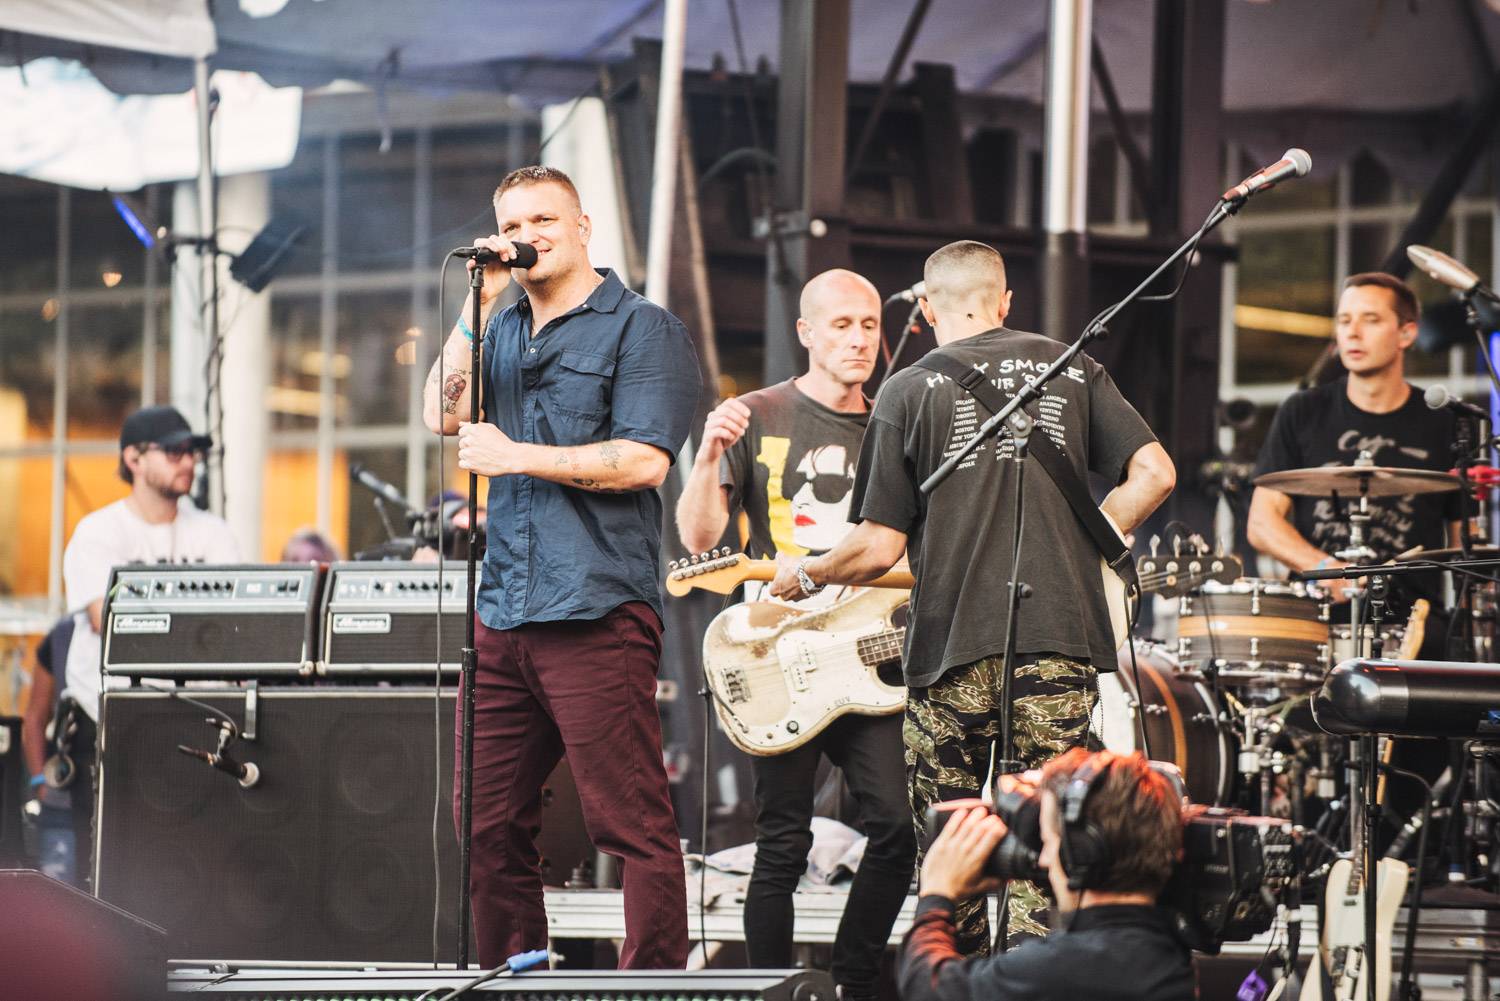 Cold War Kids at the Bumbershoot Music Festival 2018 - Day 3. Sept 2 2018. Pavel Boiko photo.